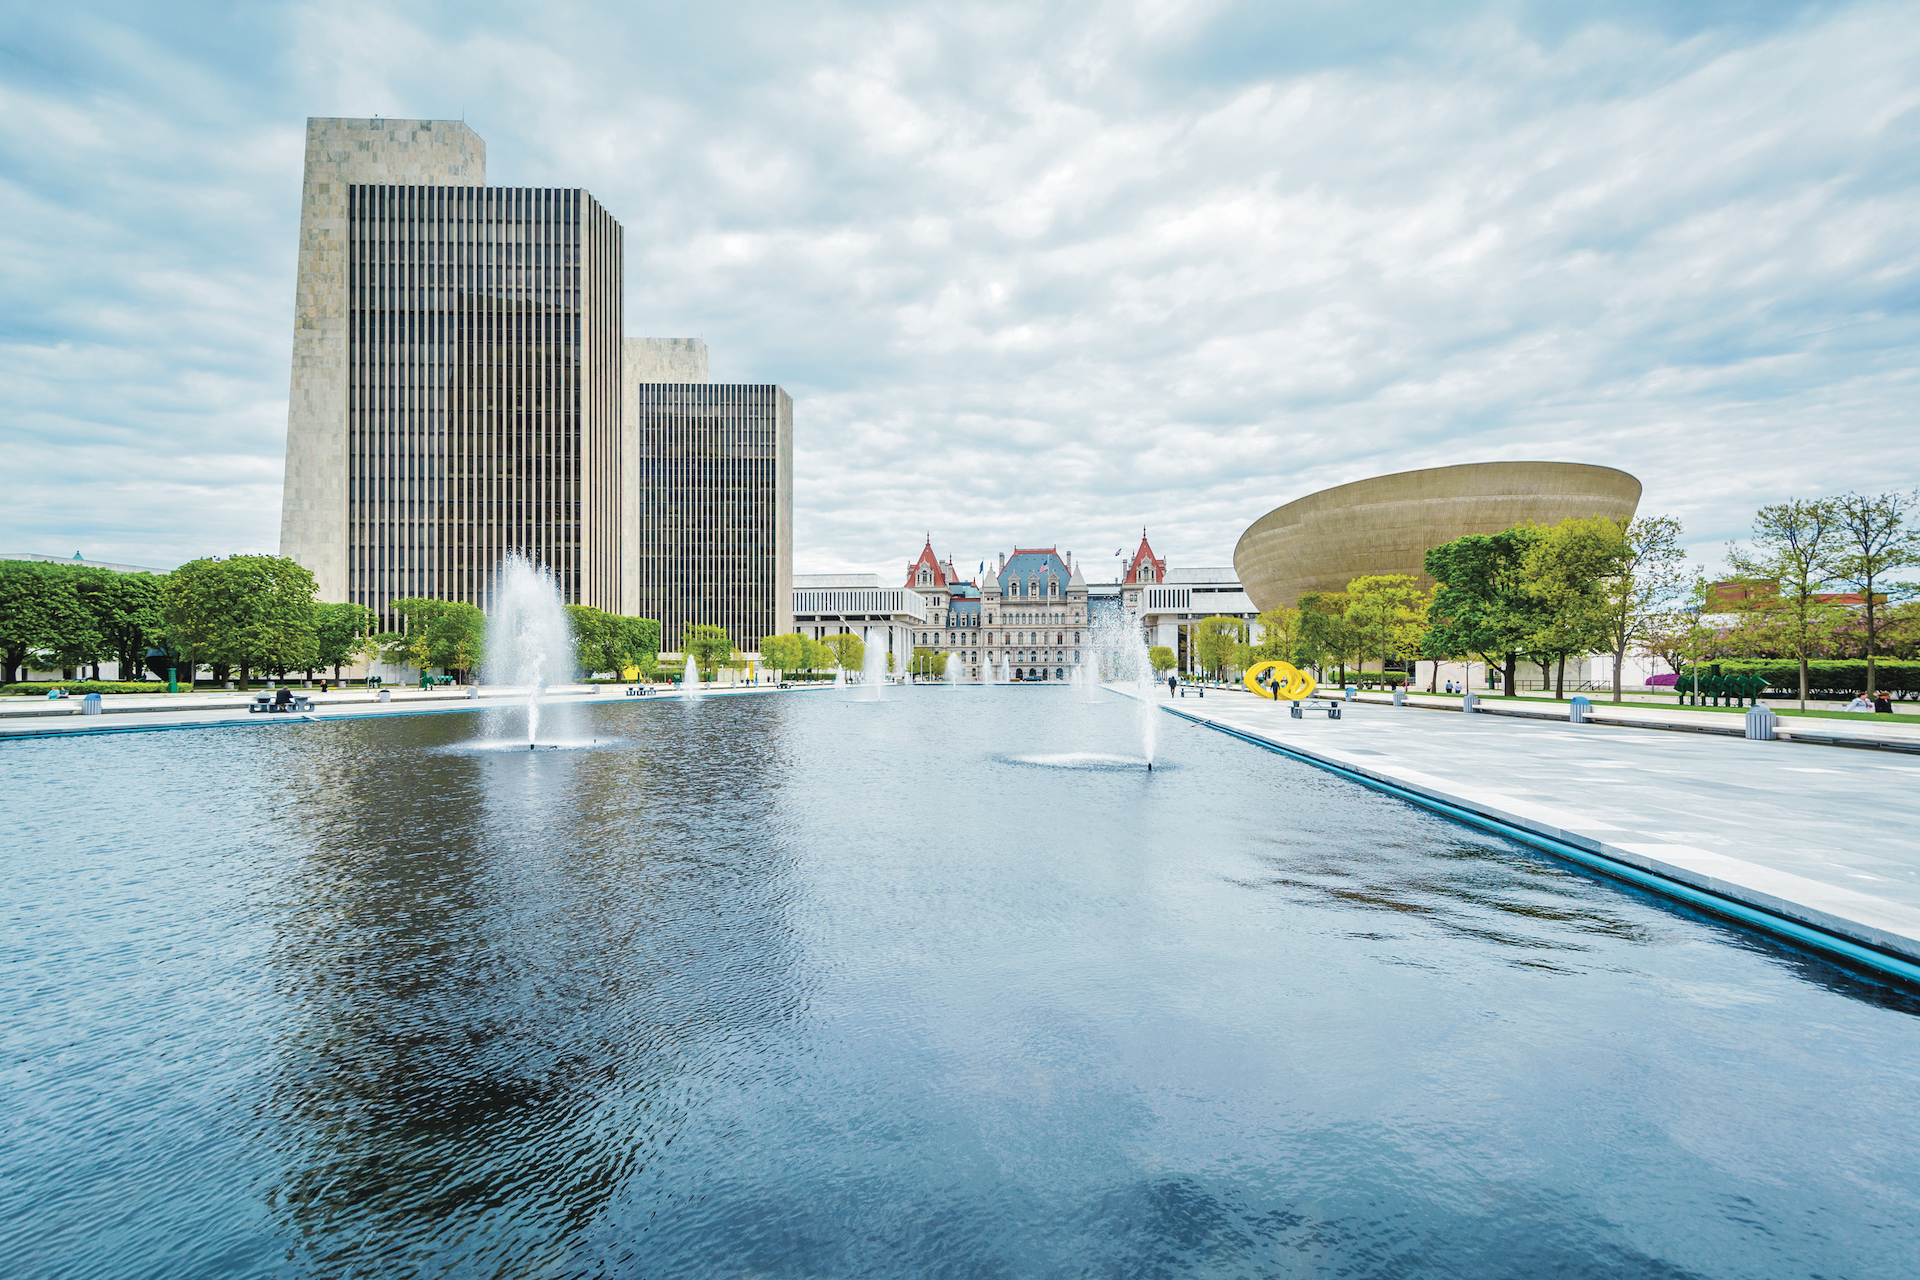 In 2021, Ramboll won its largest US energy masterplan project to date, an energy audit of the Empire State Plaza in downtown Albany, New York. The Plaza is home to several state level government agencies, the legislature, and governor’s office, employing more than 13,000 public servants in total. The project focuses on transitioning the Plaza to renewable and low-carbon energy solutions.